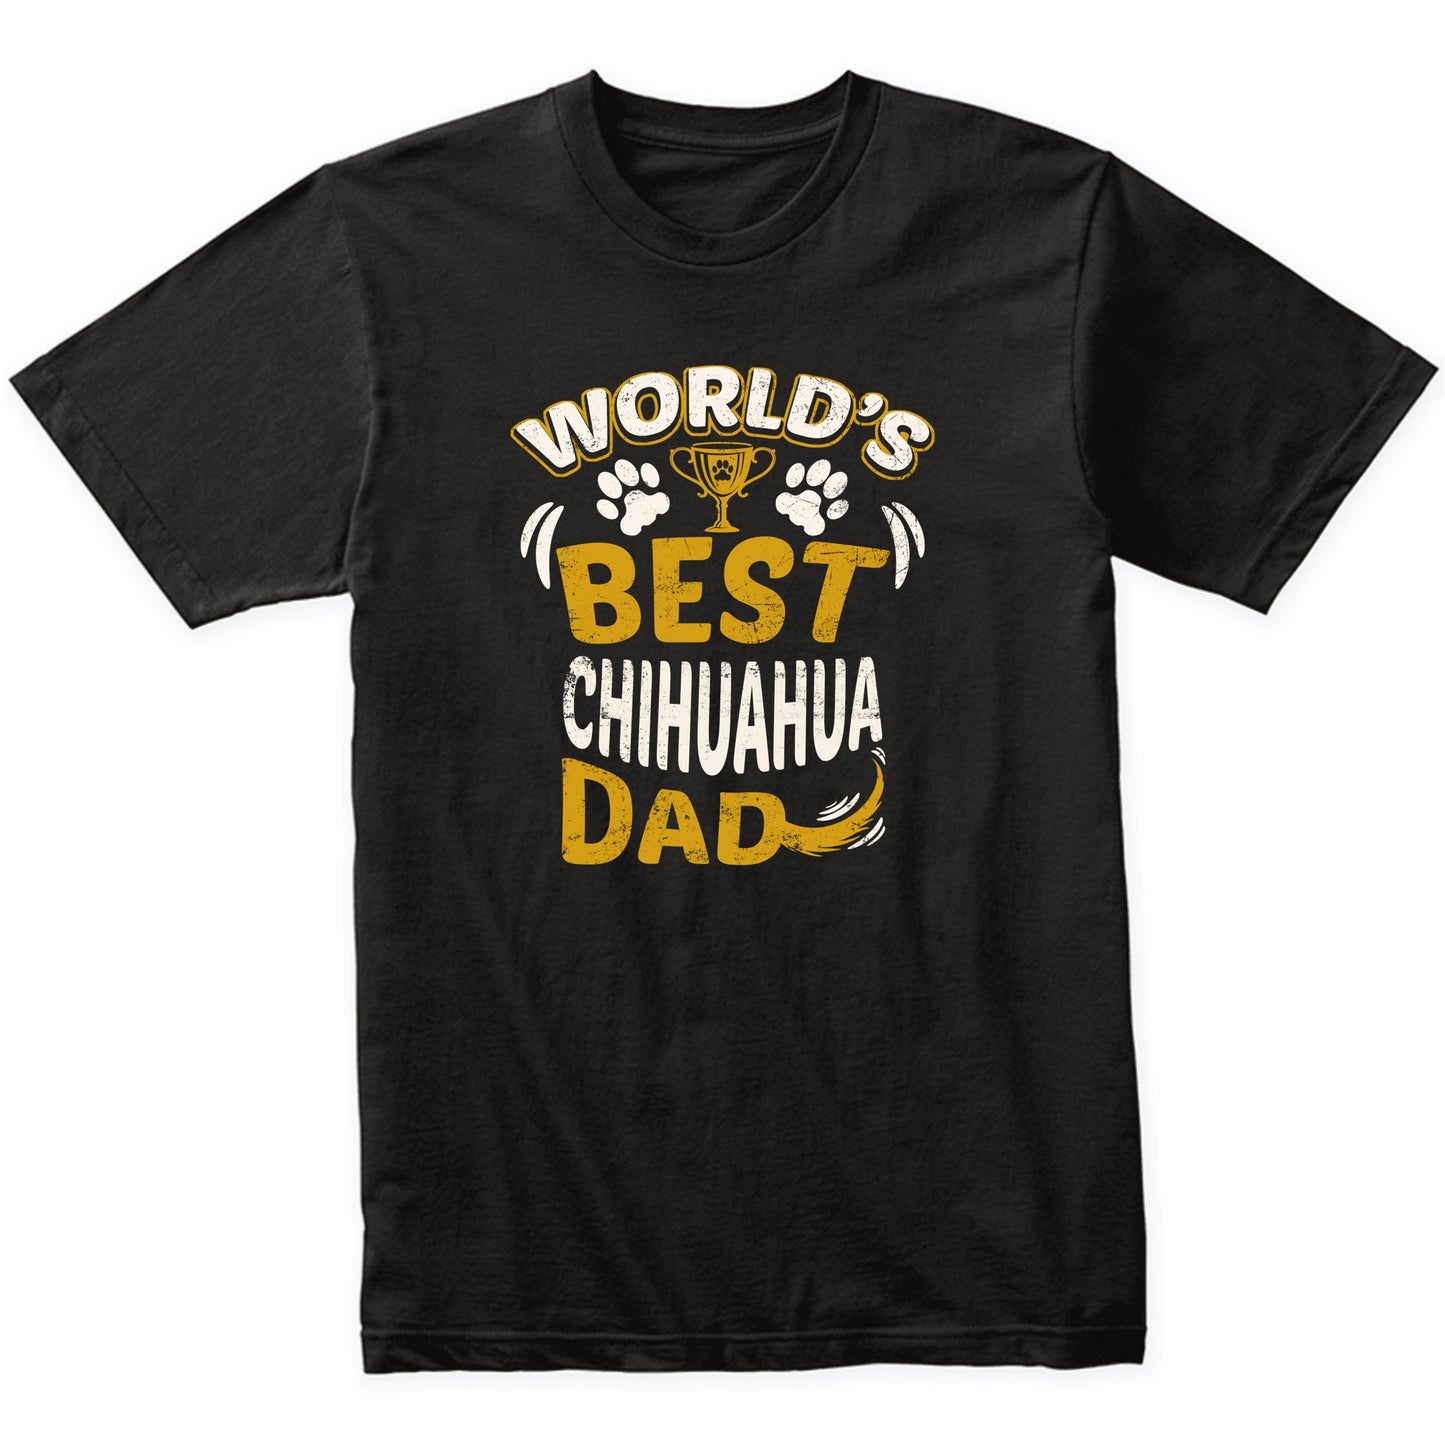 World's Best Chihuahua Dad Graphic T-Shirt